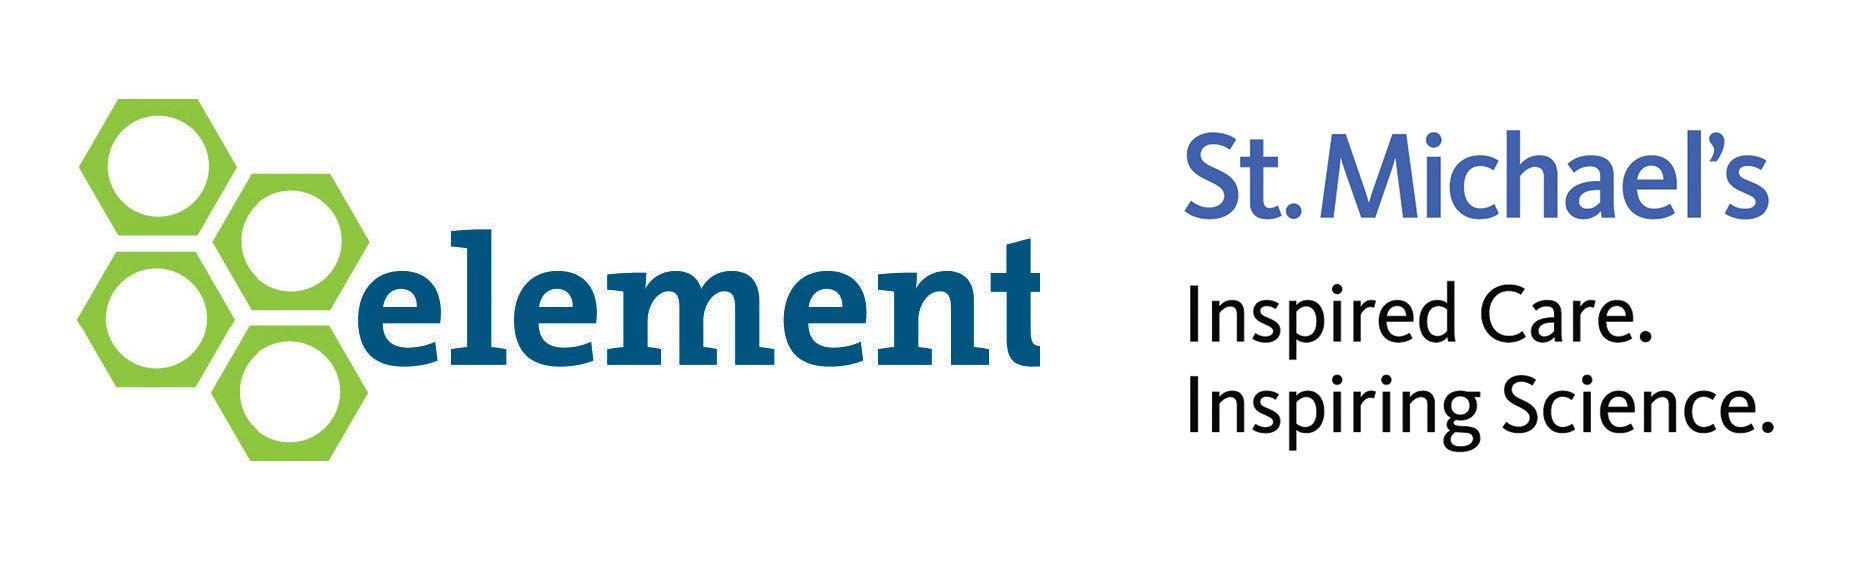 Element Fleet Logo - CNW. Element Financial Invests in Building a Better Toronto